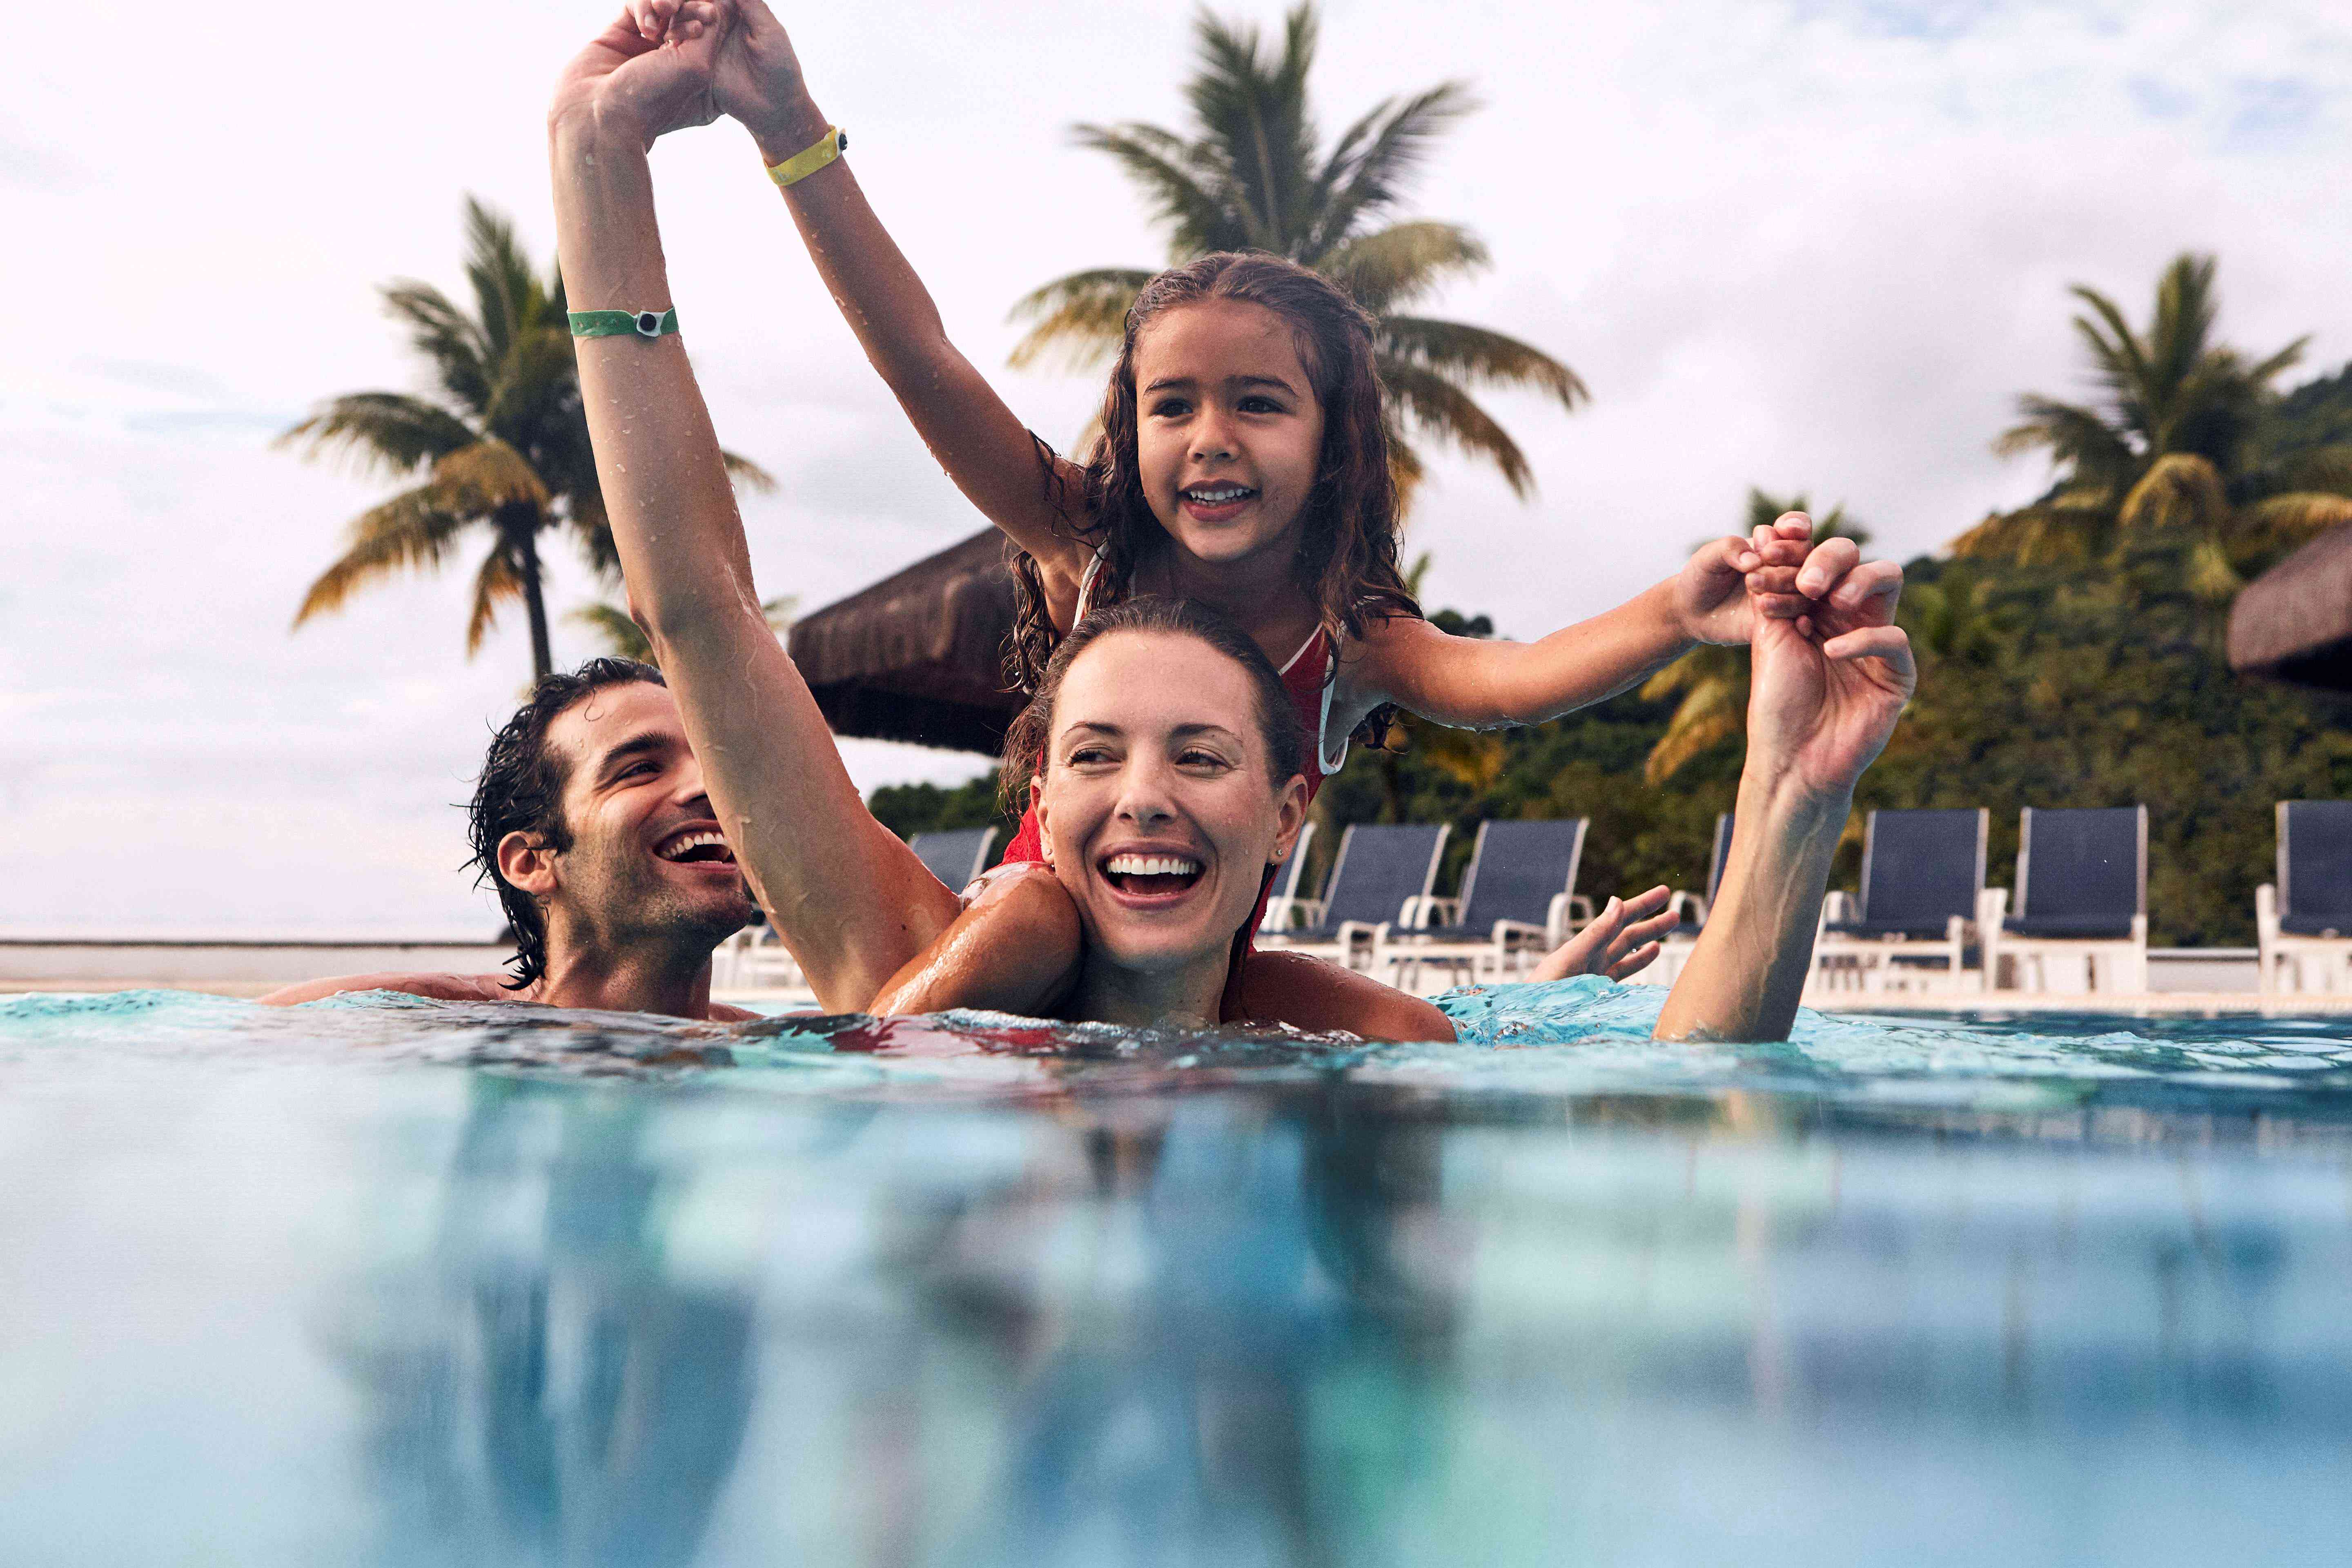 Reconnect at Club Med